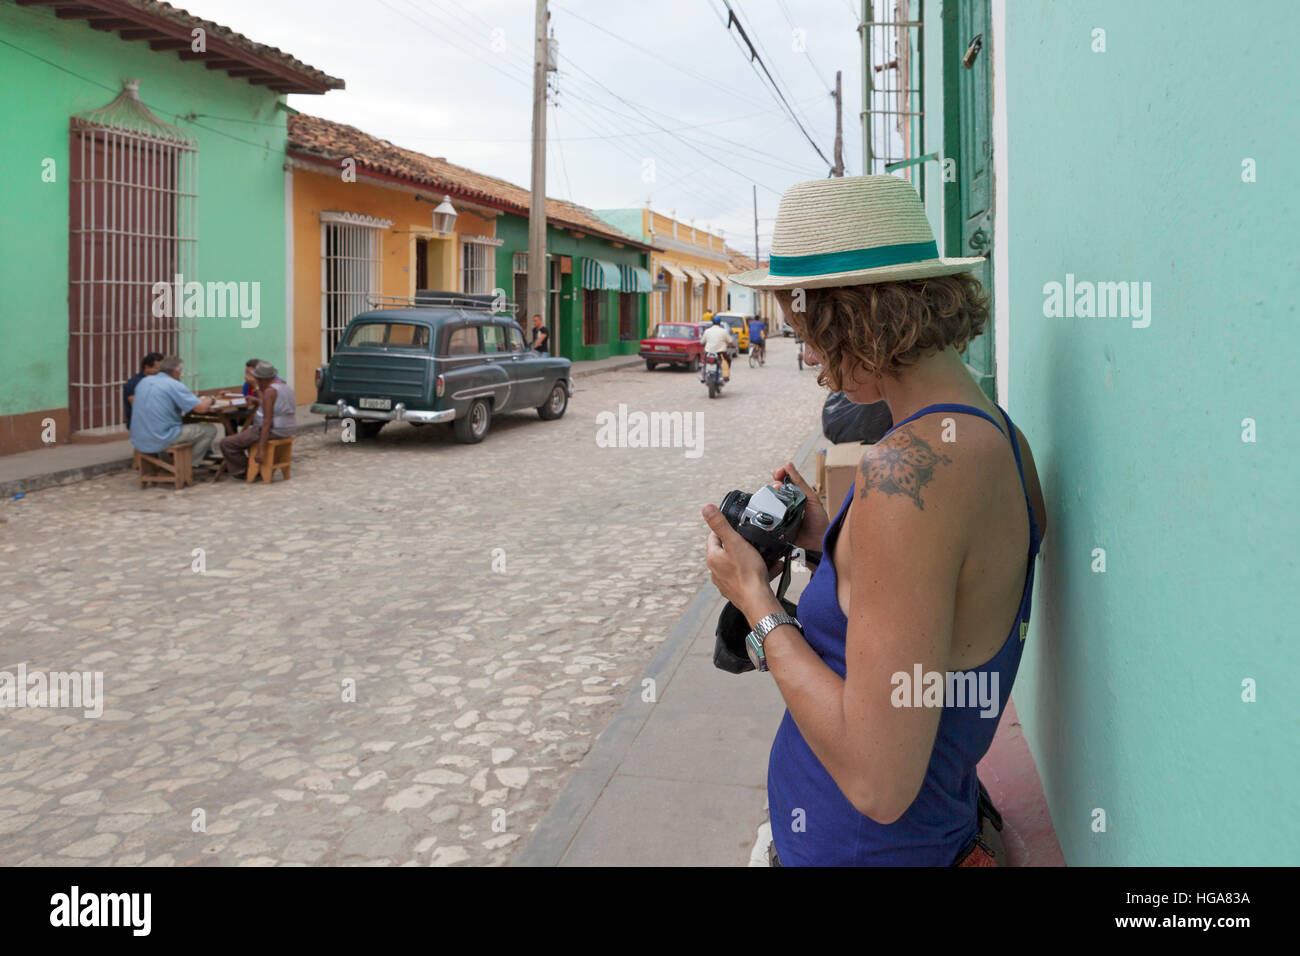 Girl tourist on her 20 30 years old taking photo in Trinidad, Cuba Stock Photo